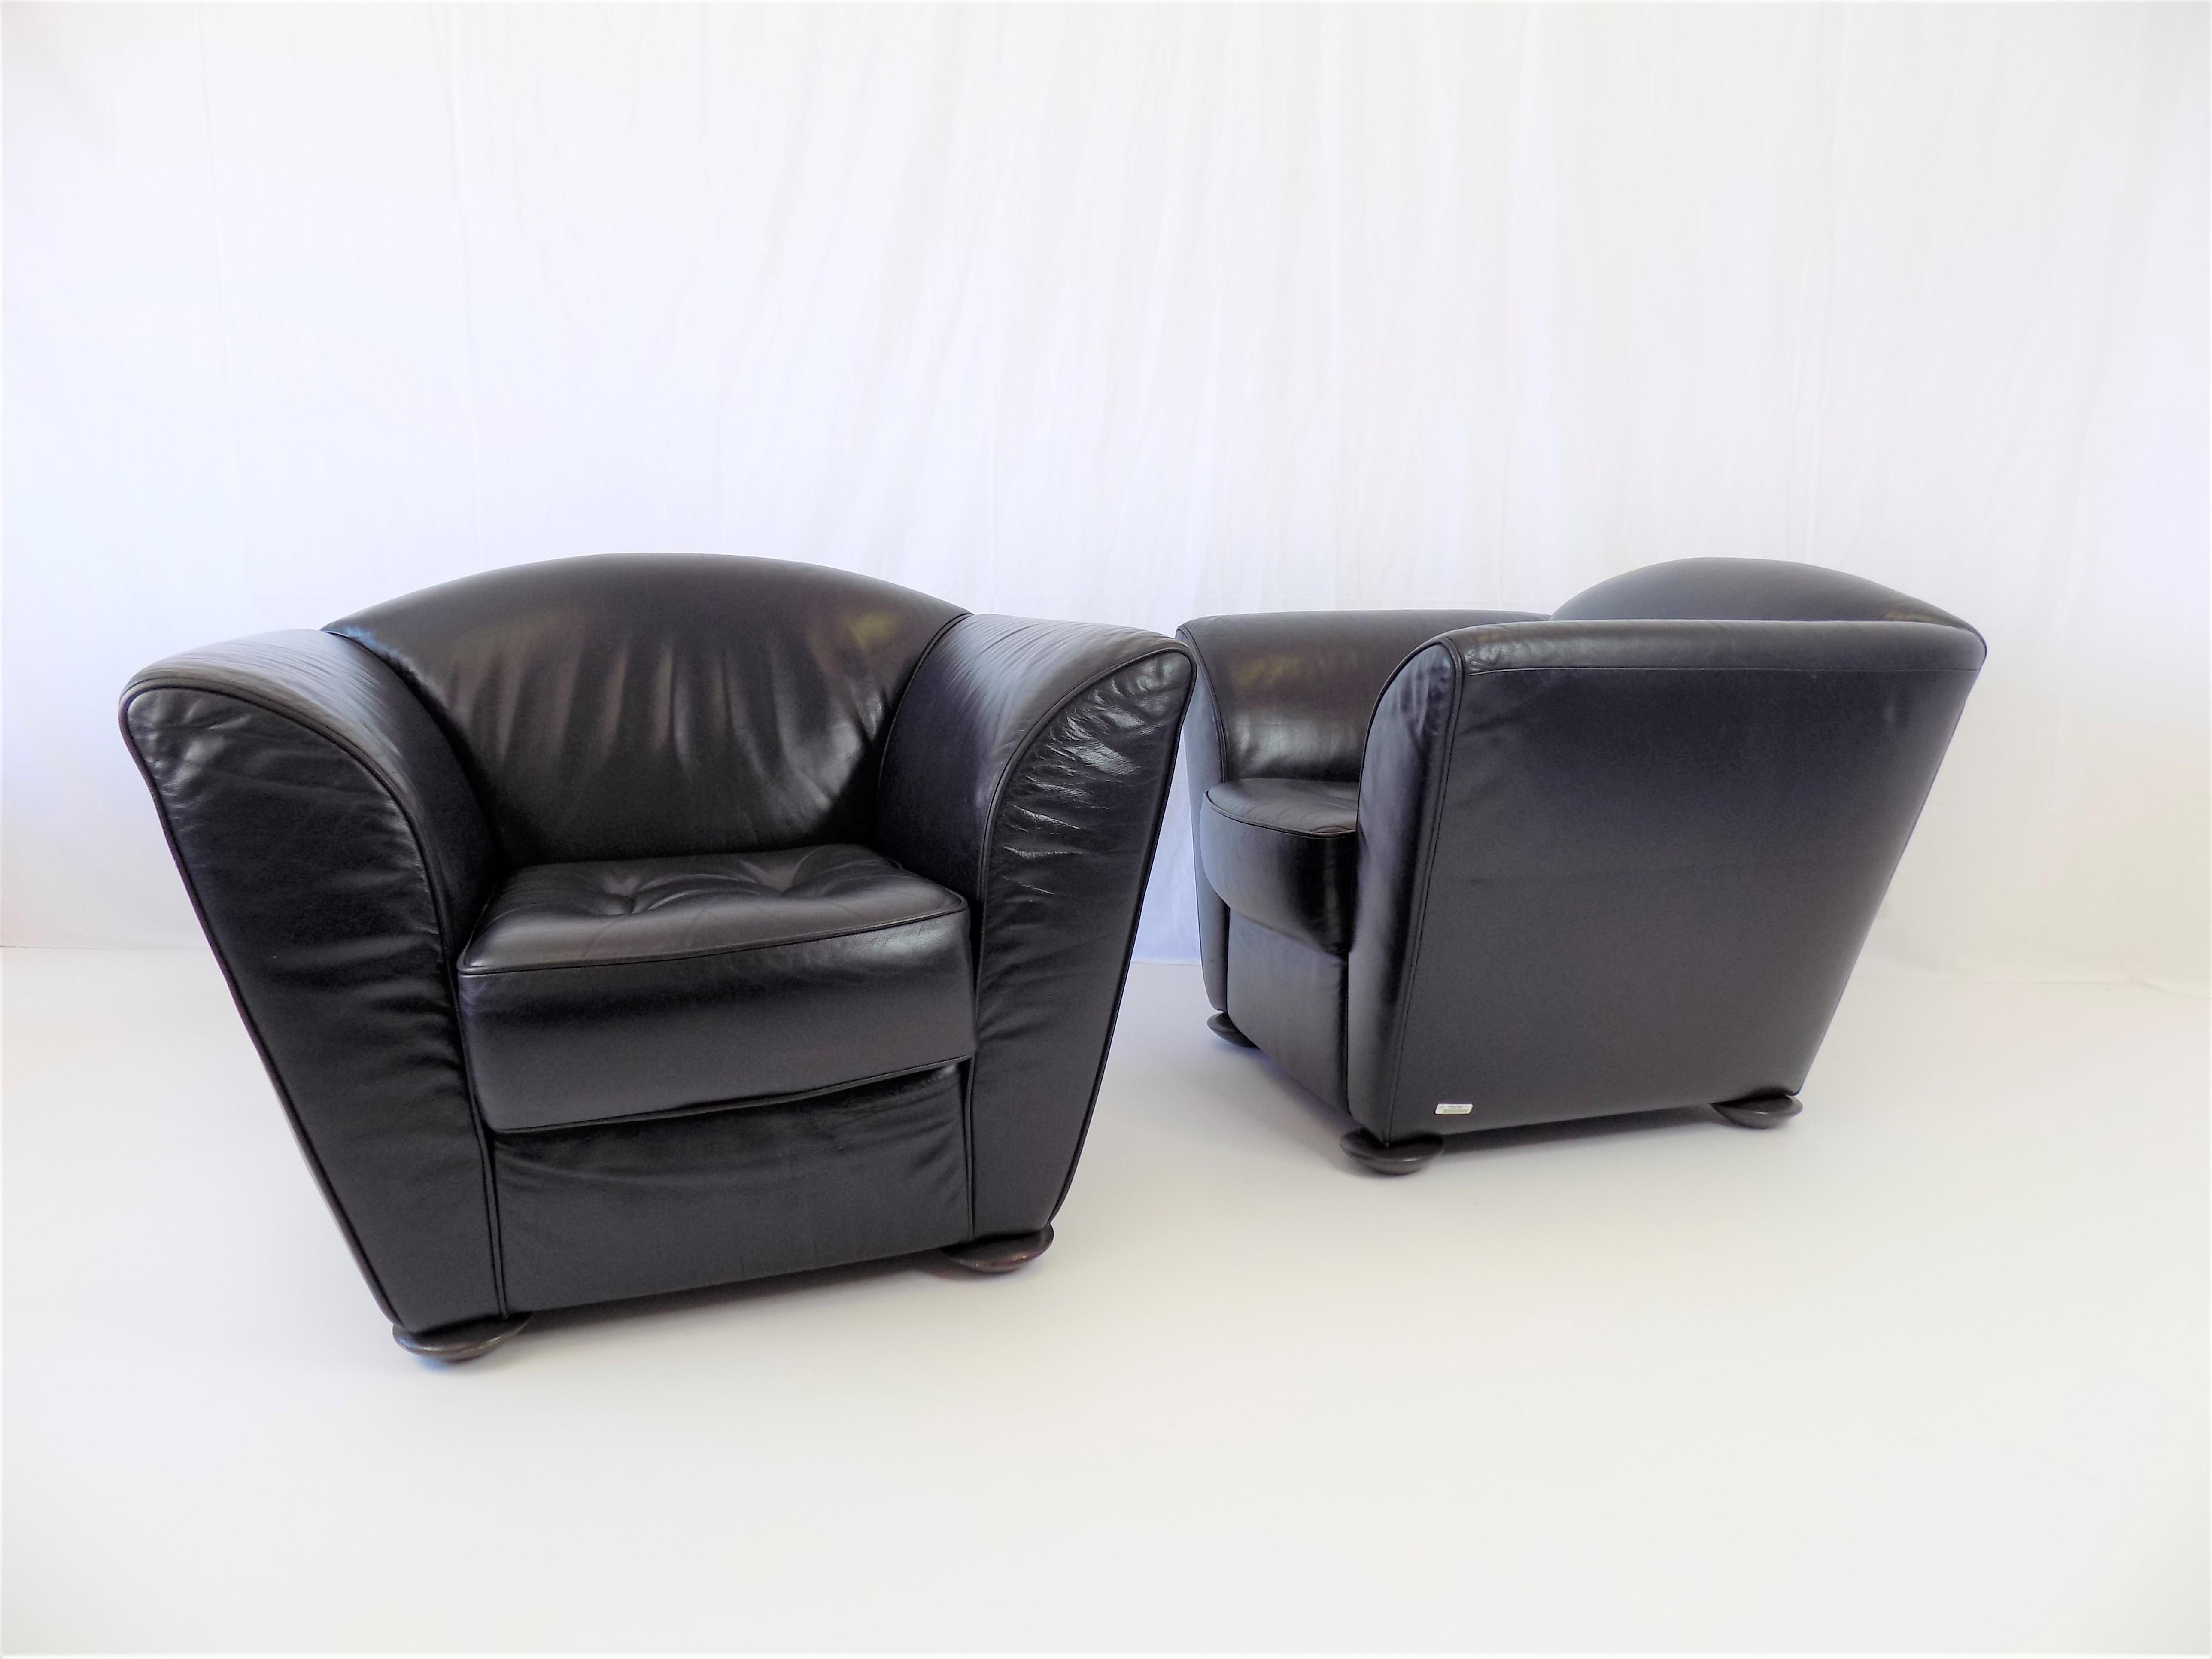 Cor Zelda Set of 2 Leather Armchairs By Peter Maly, Germany, 1980 For Sale 9